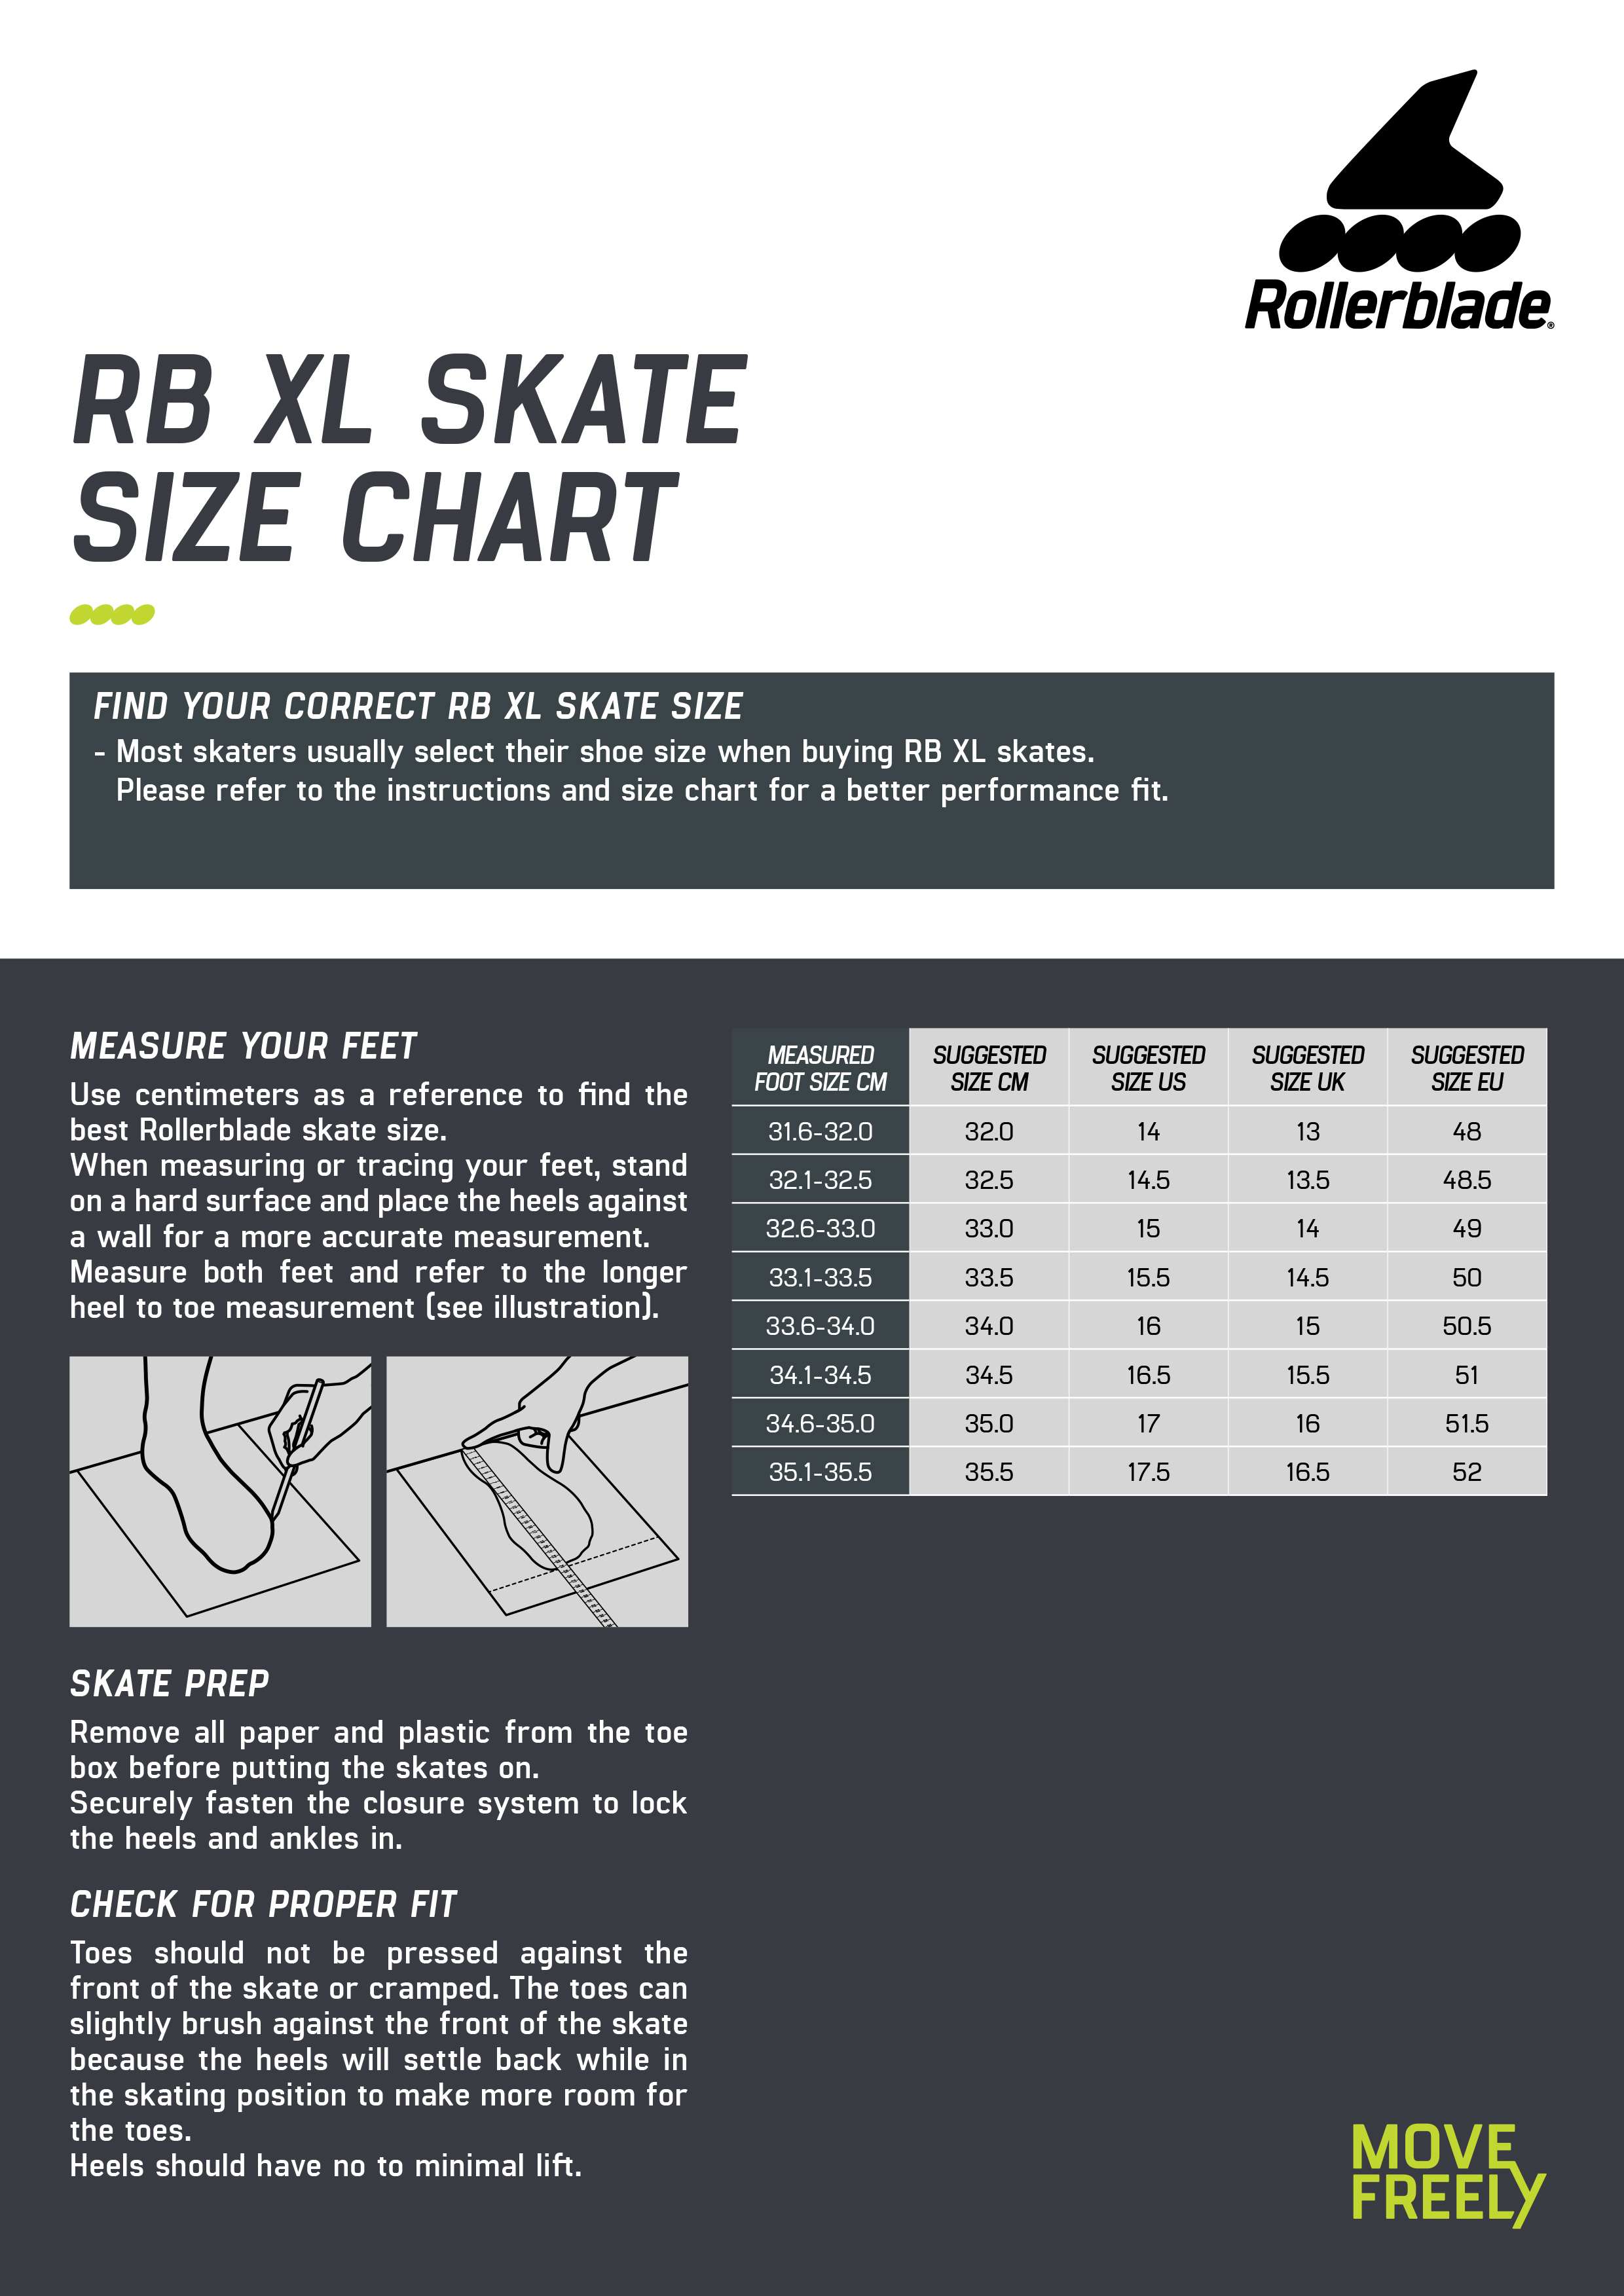 How accurate is the RB XL sizing? : r/rollerblading